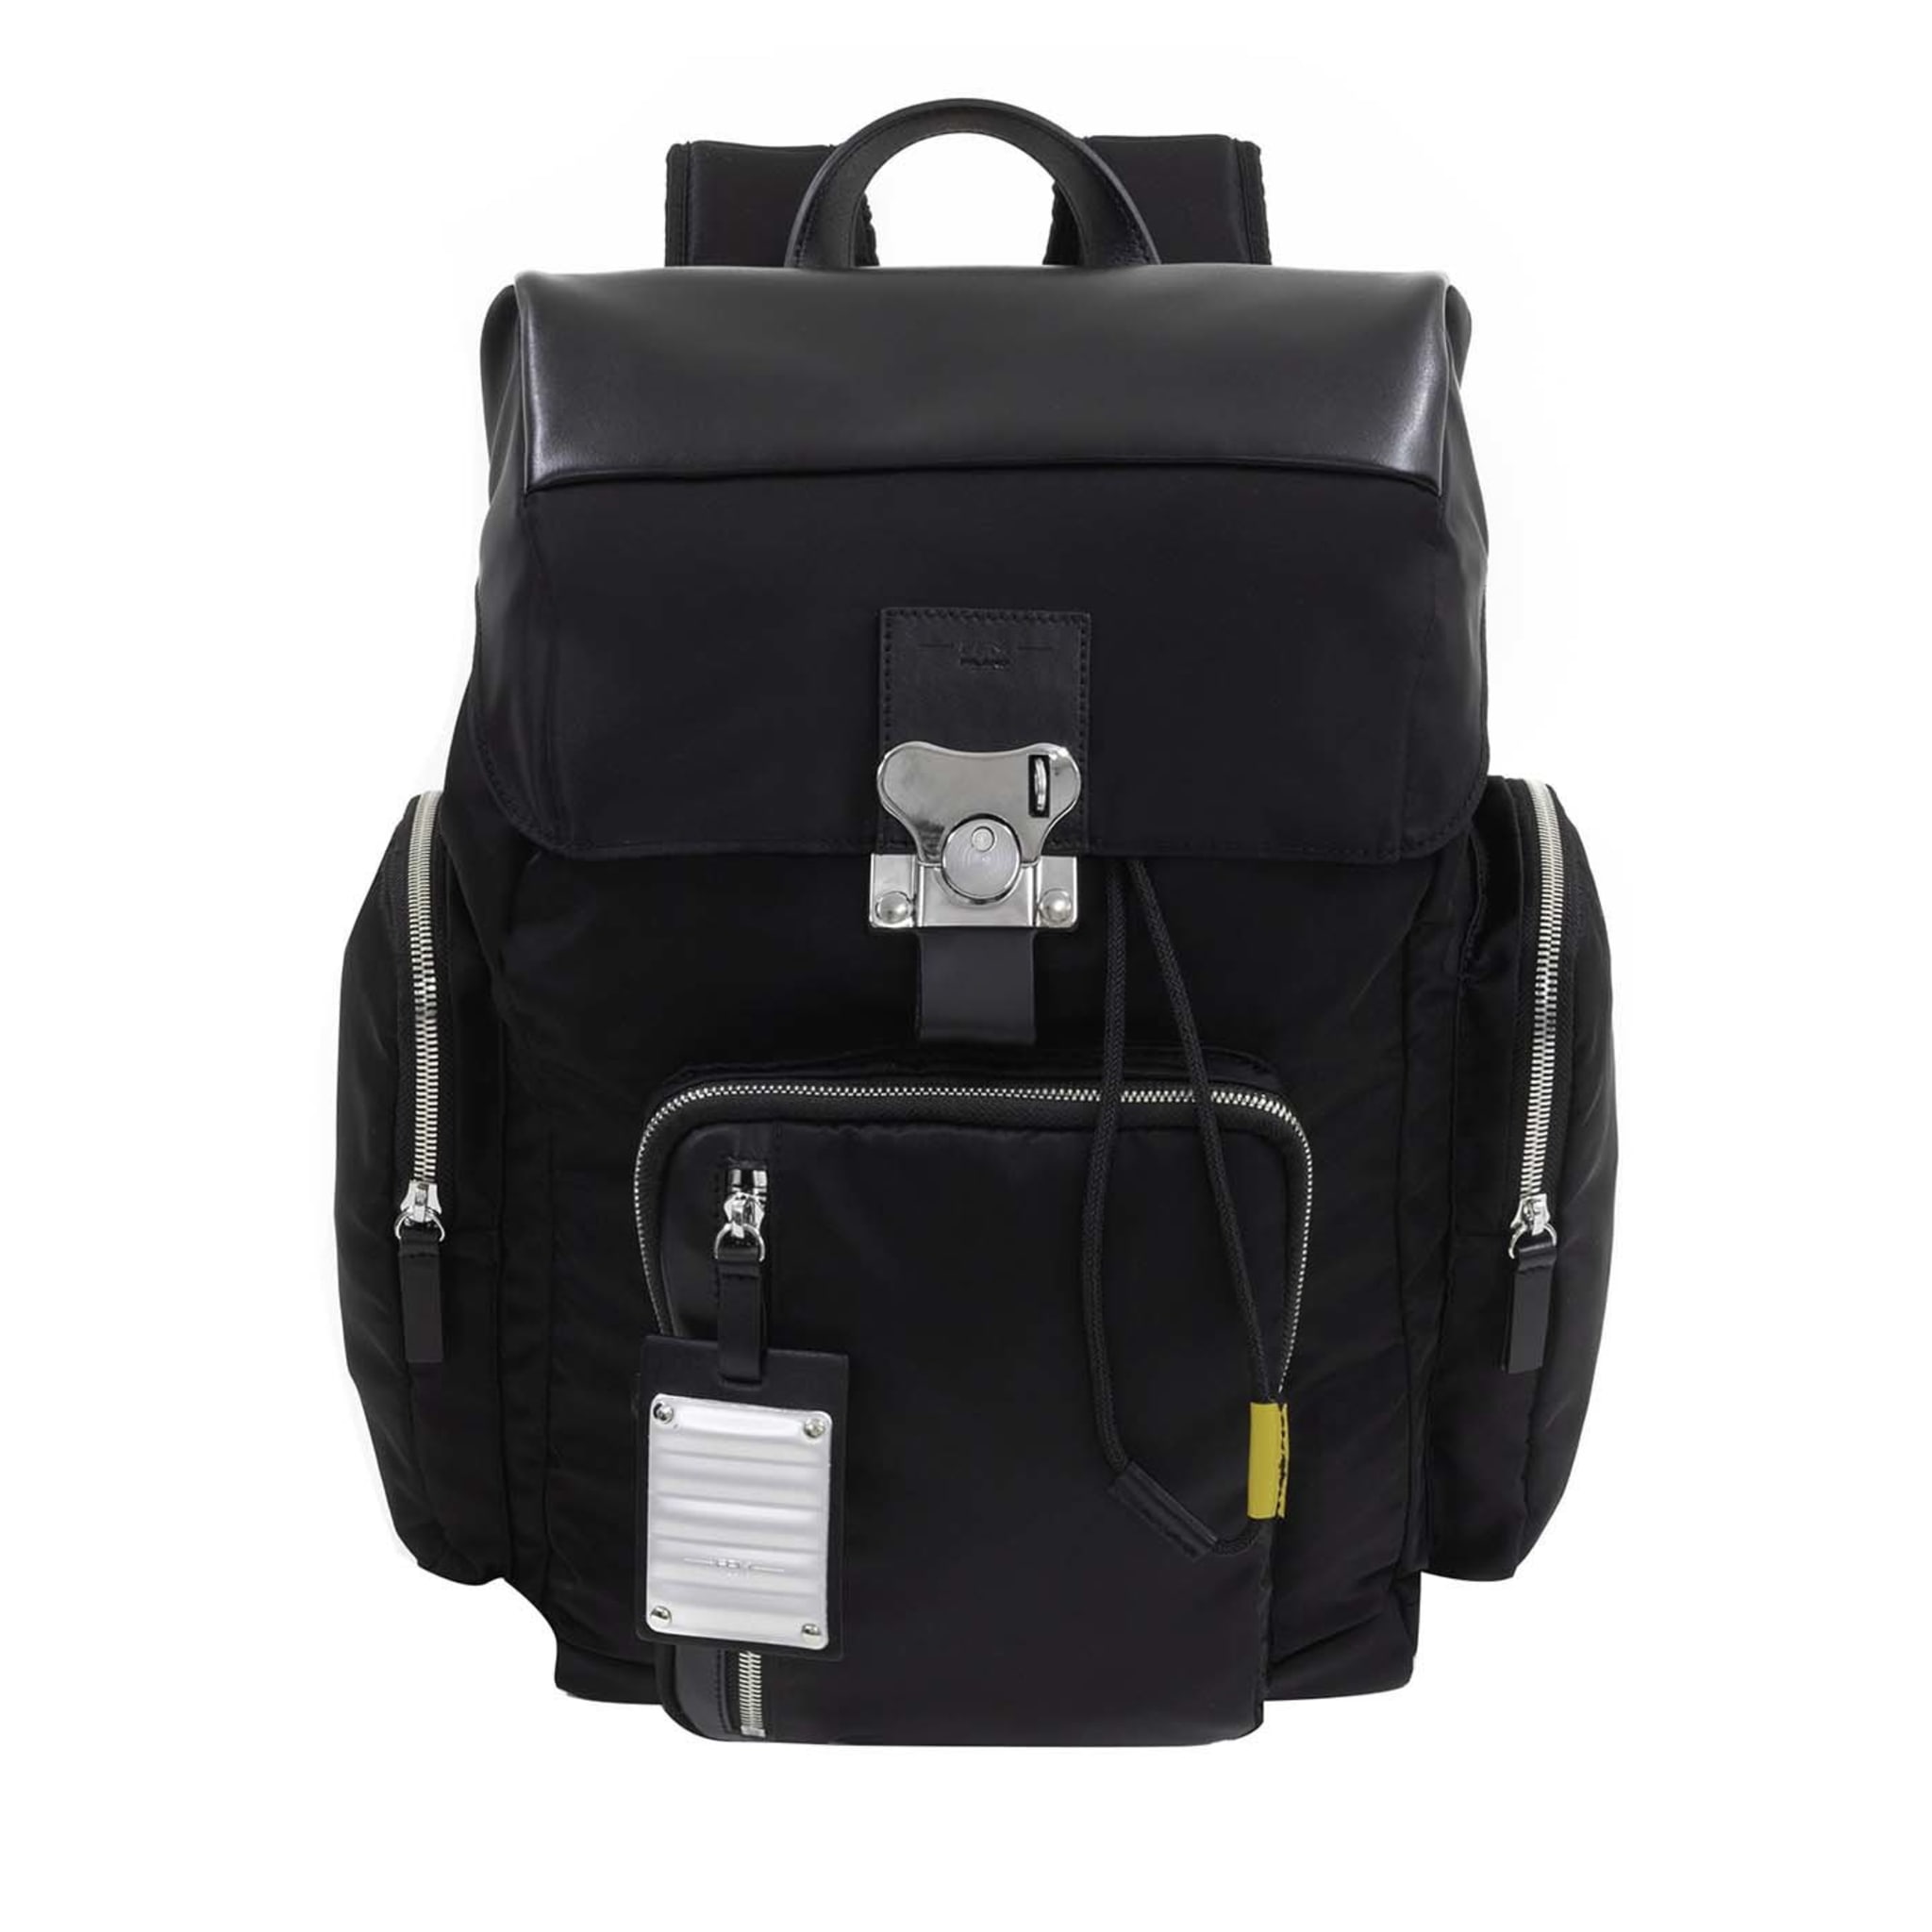 Medium Bank on the Road Butterfly Backpack Black - Main view